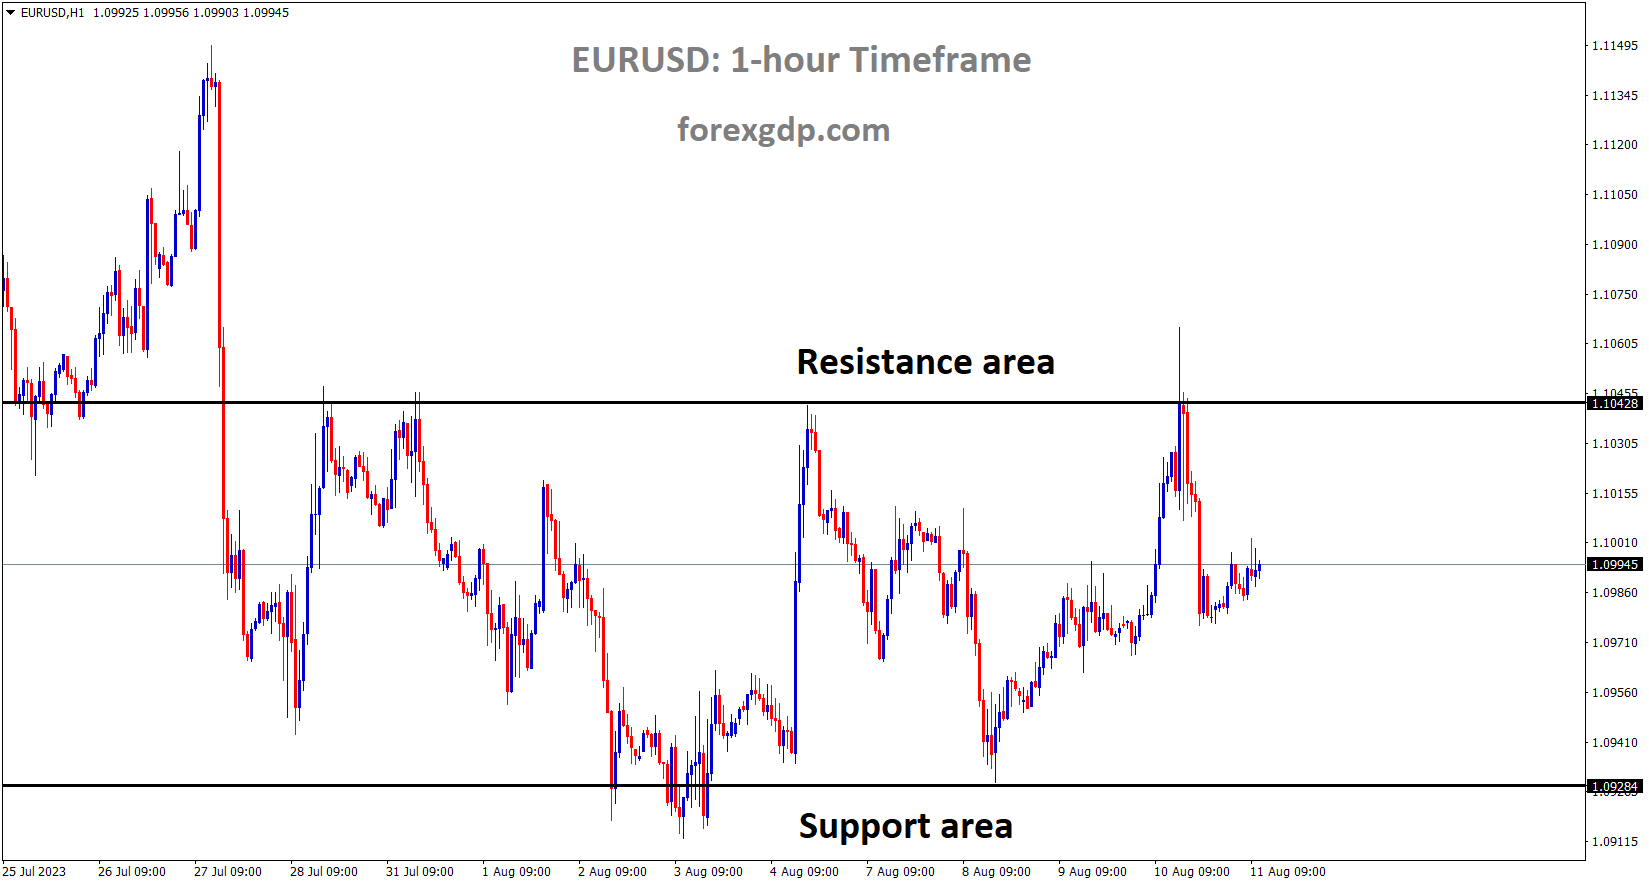 EURUSD is moving in the Box pattern and the market has fallen from the resistance area of the pattern